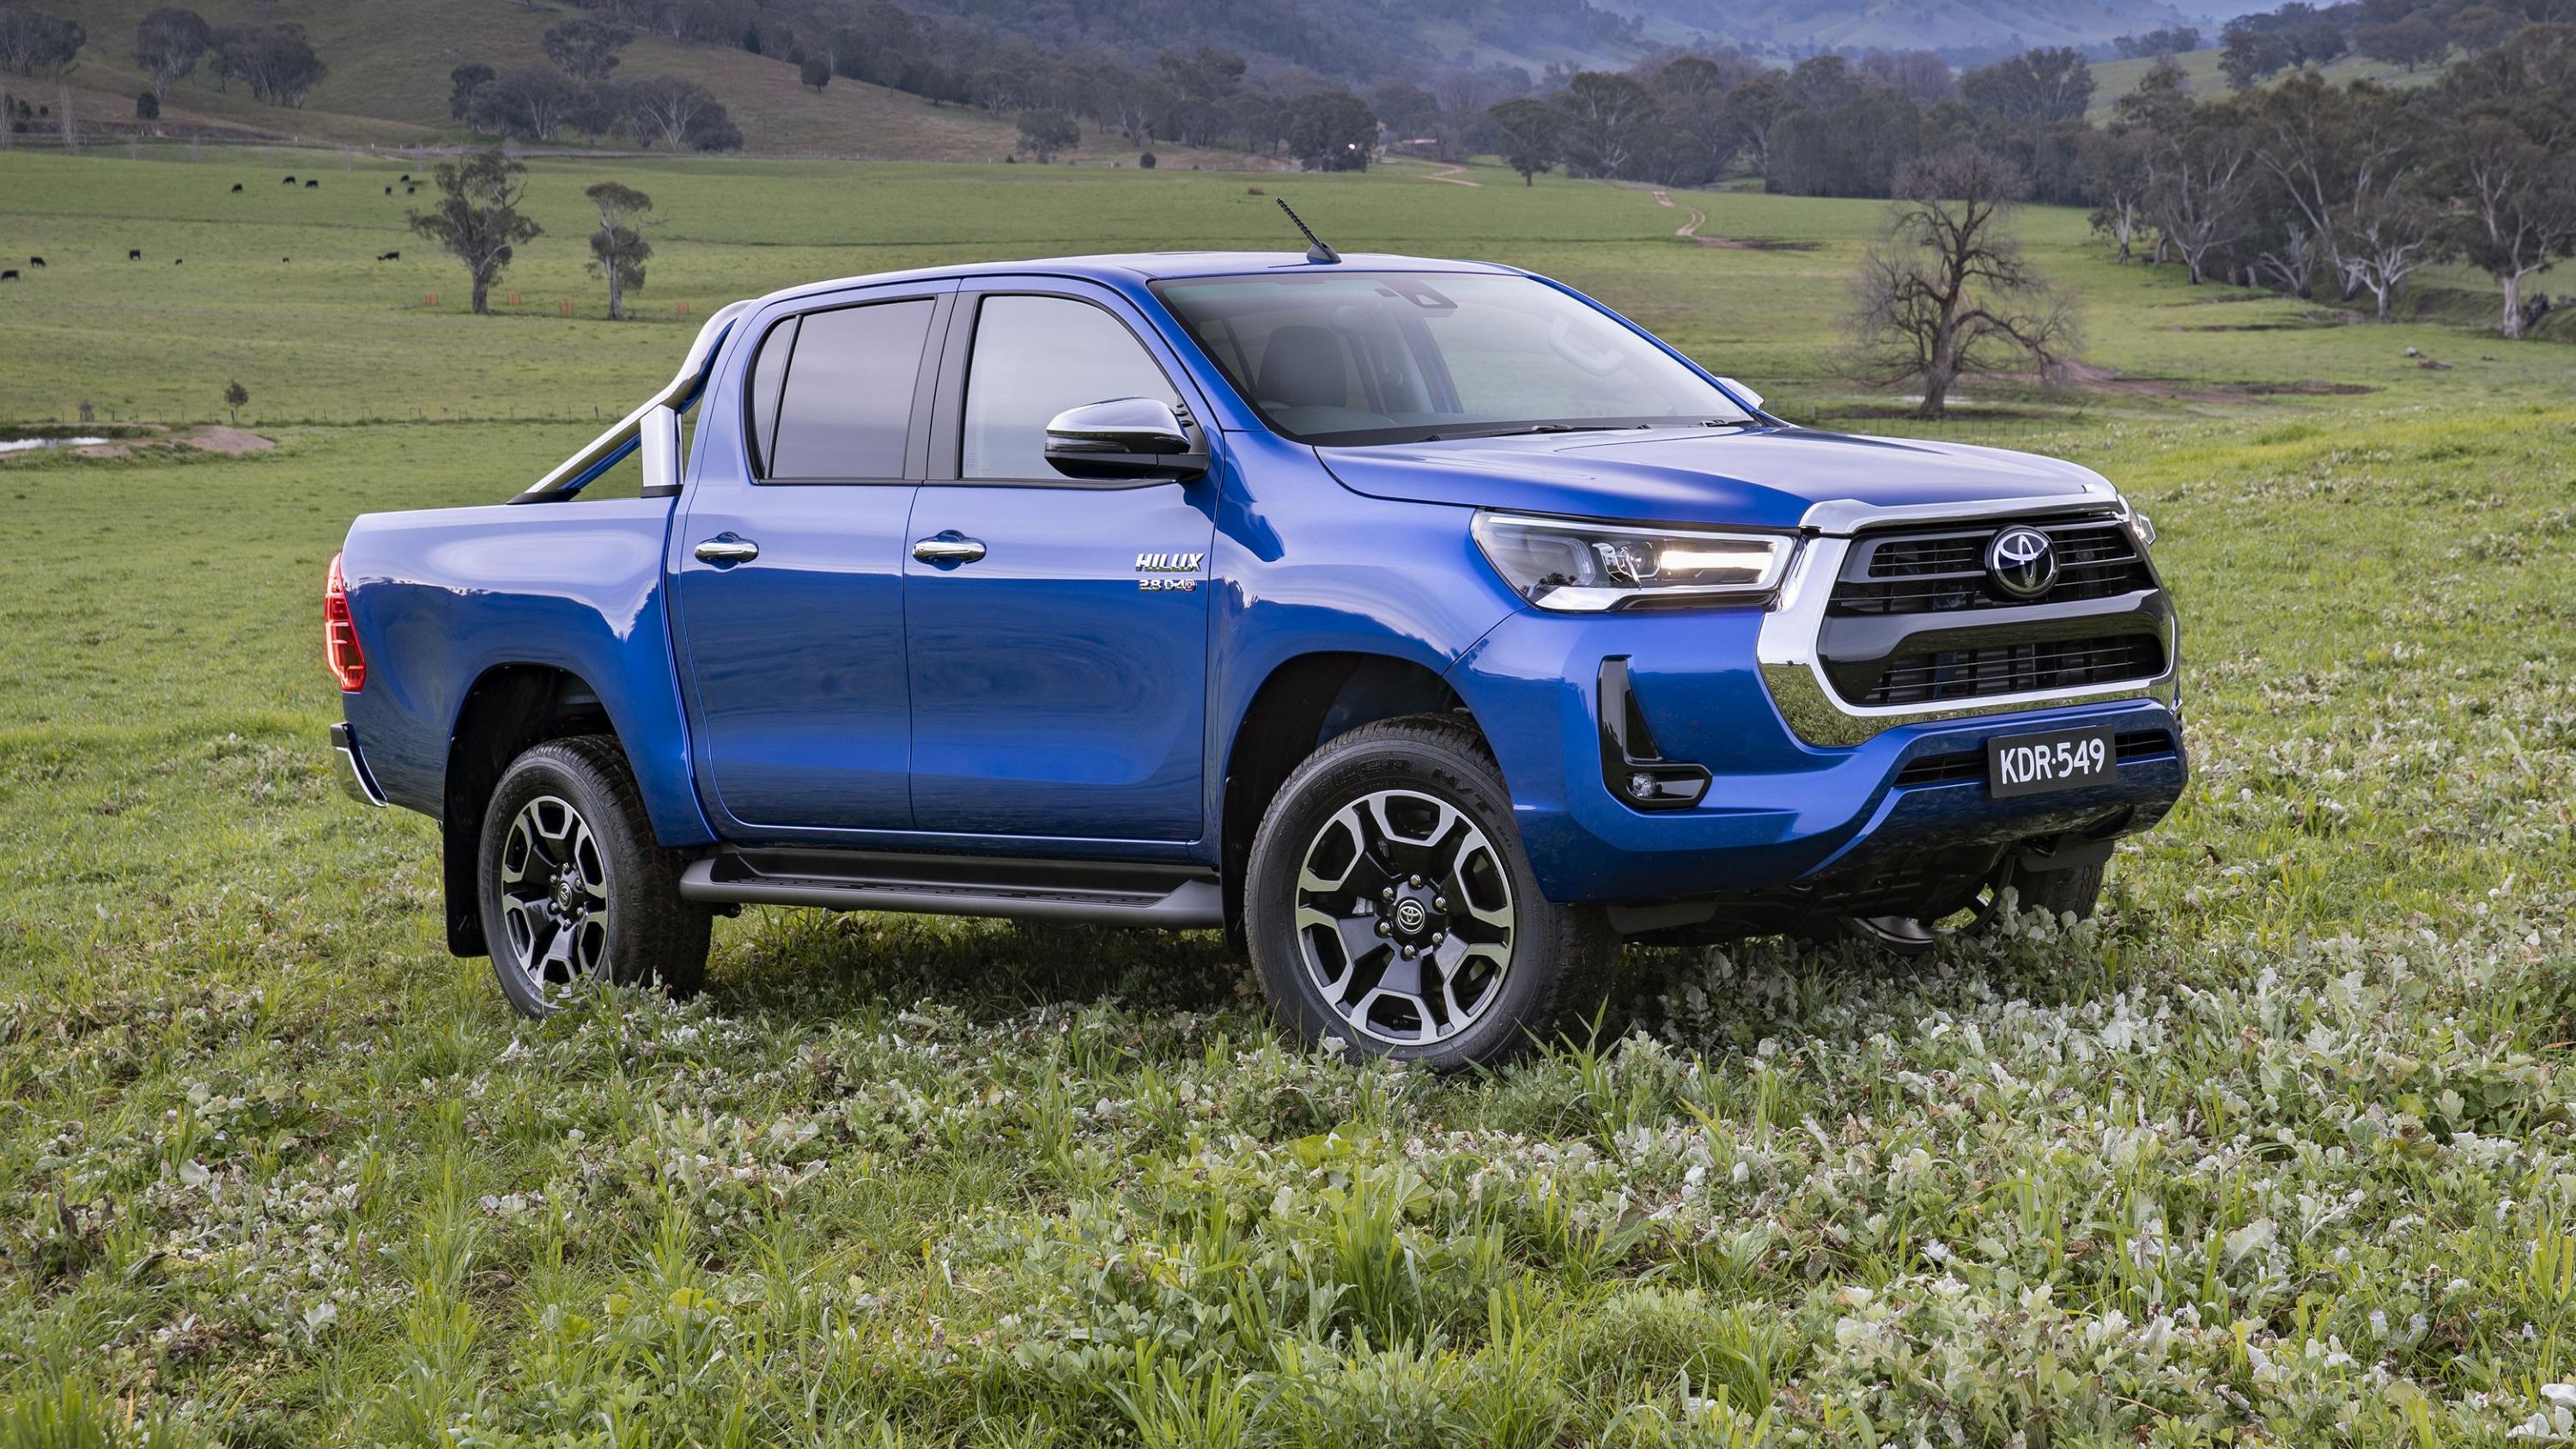 Toyota Australia wants to sell 25,000 'certified' used cars per year